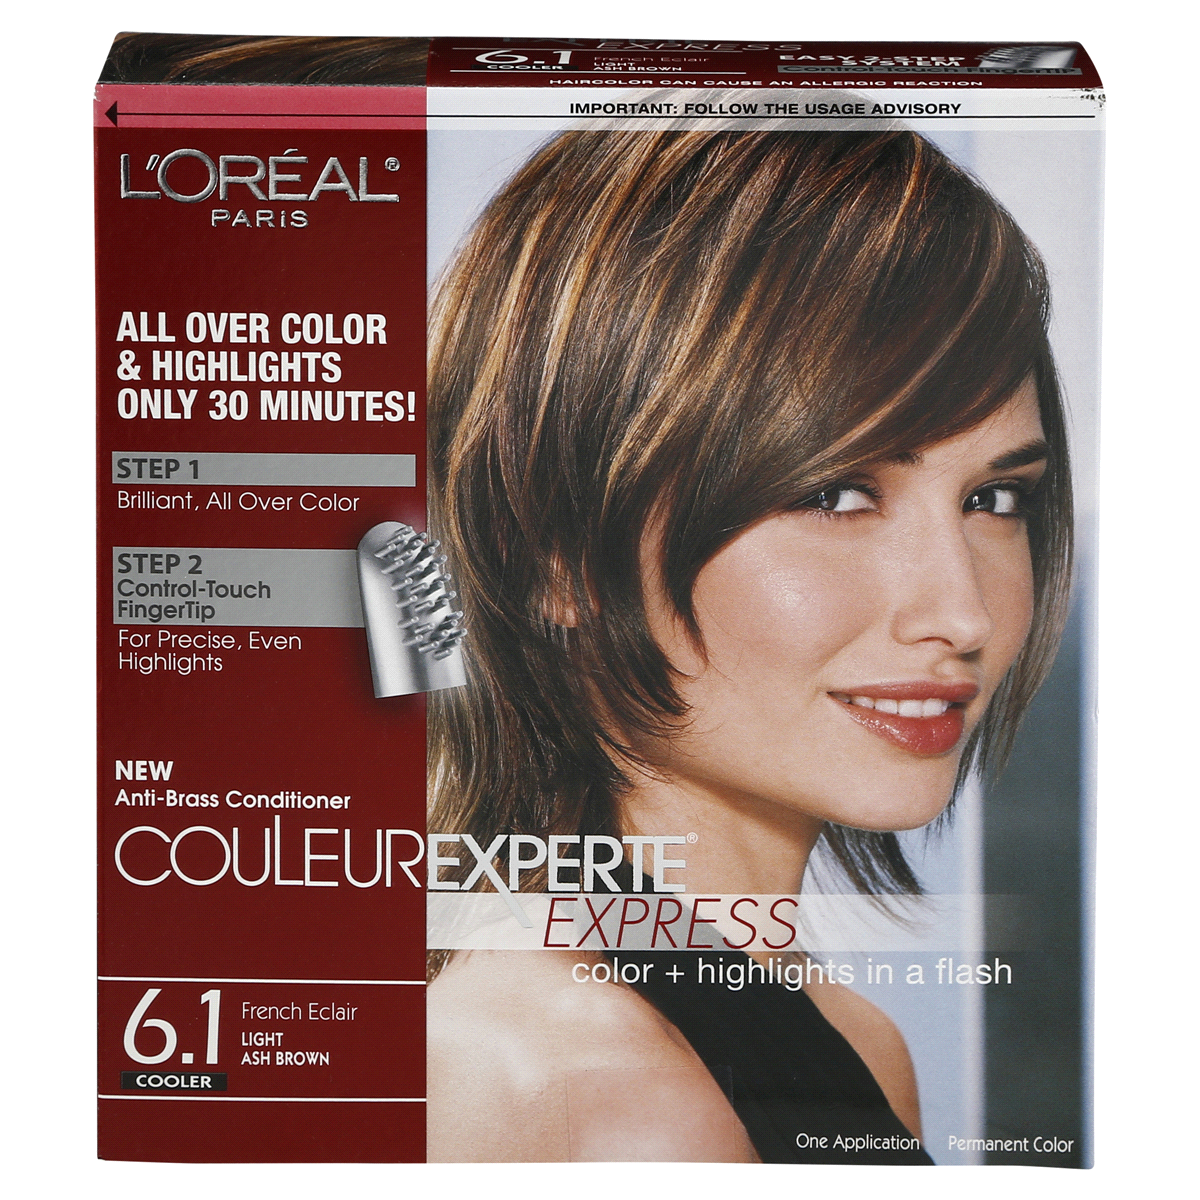 slide 1 of 8, L'Oréal Couleur Experte Express Color + Highlights in a Flash, Cooler French Eclair Light Ash Brown 6.1, 1 ct